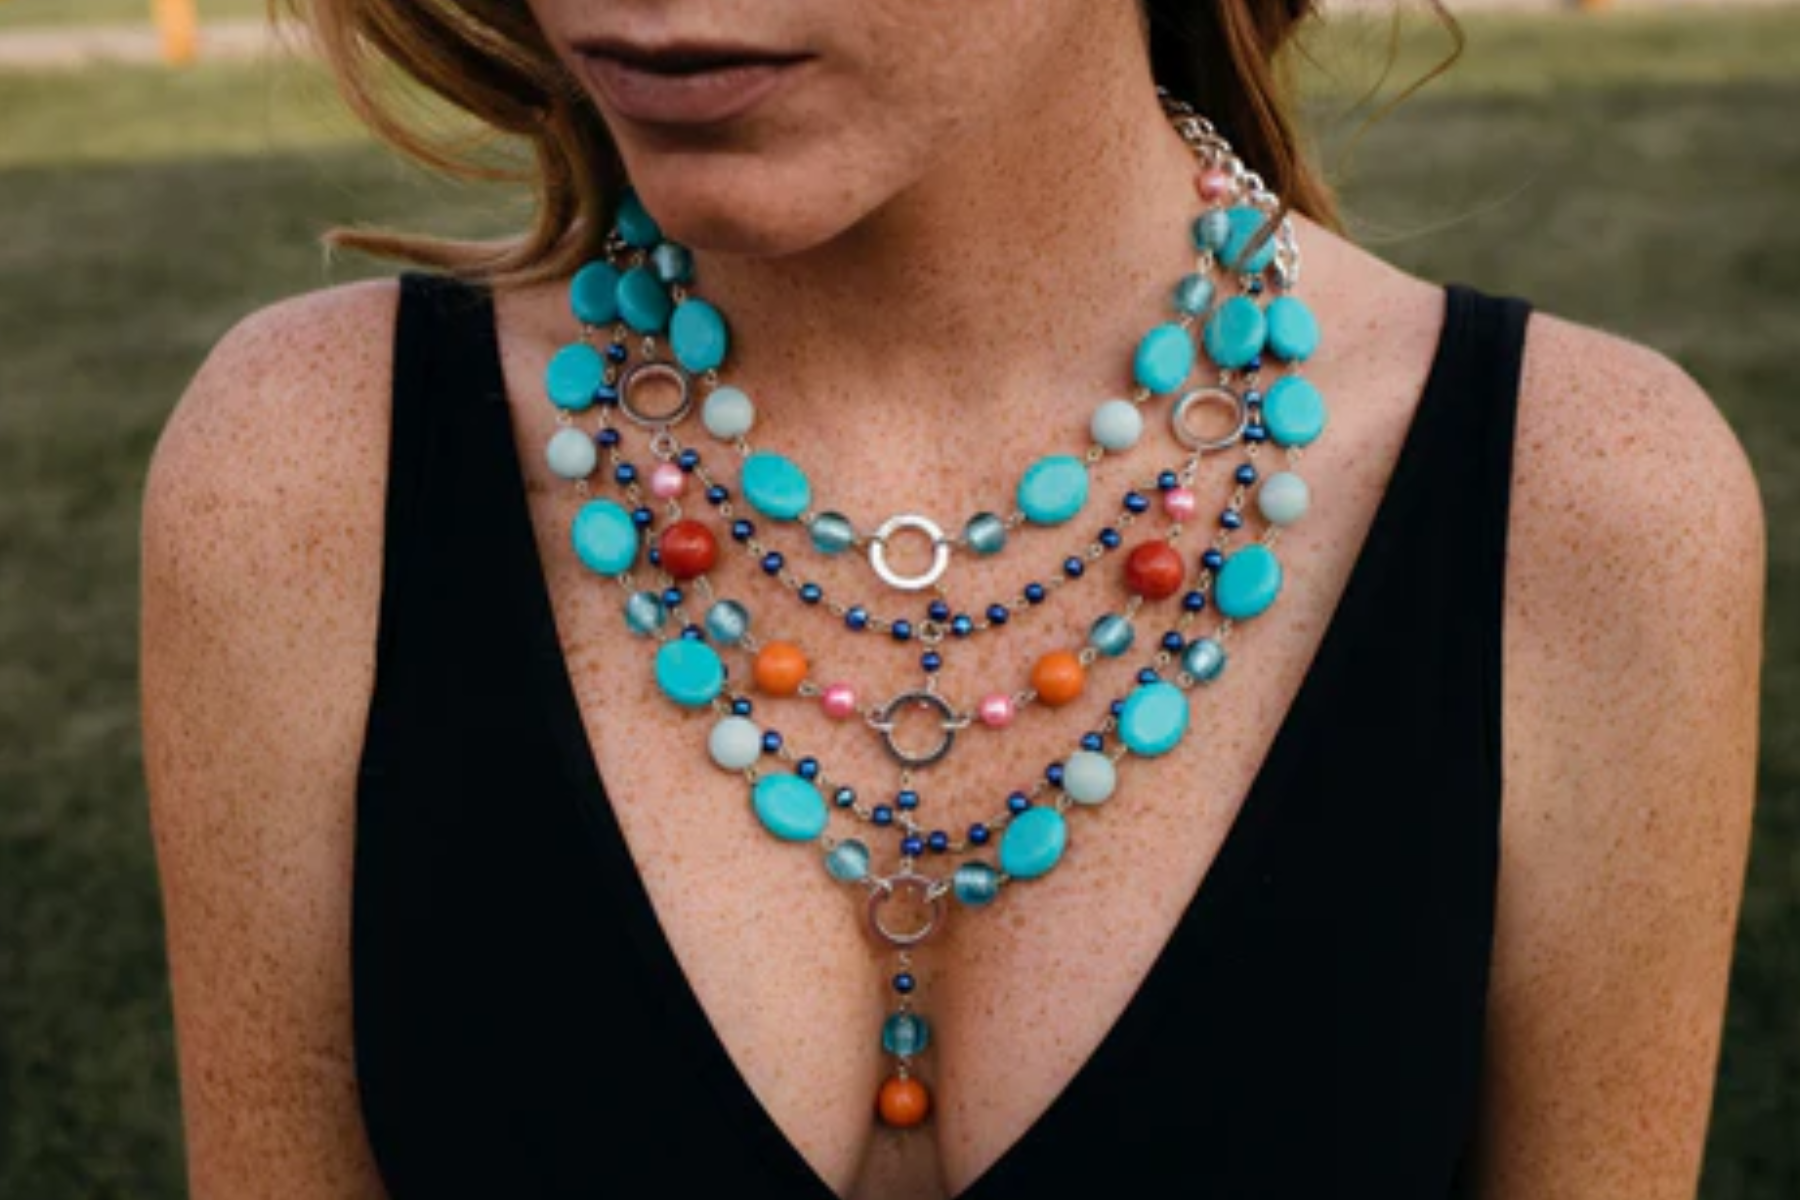 A woman wearing brightly colored beaded statement necklaces